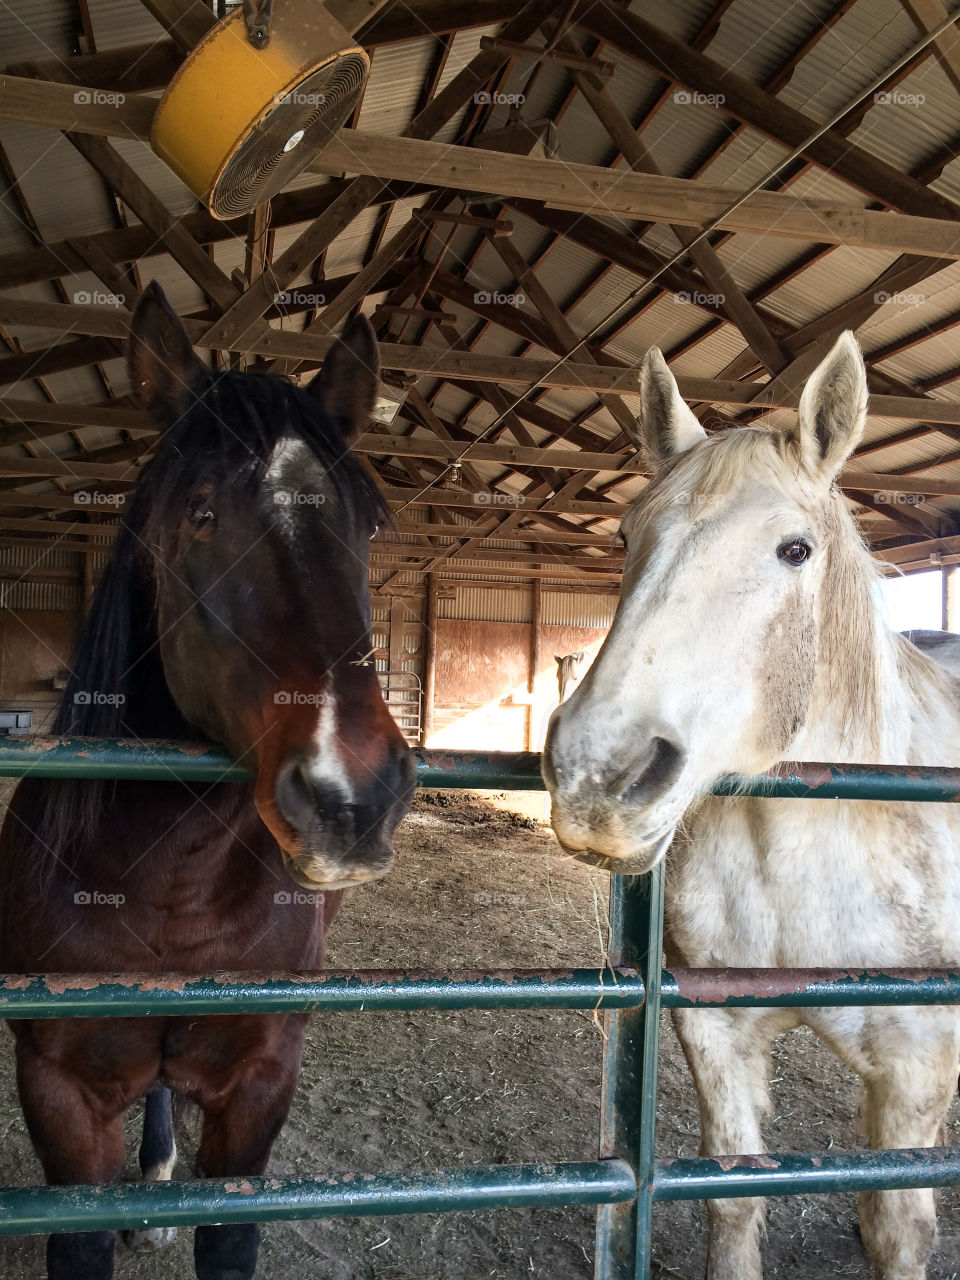 My two 4 legged babies, gray Percheron mare, June and bay gelding Smokey, waiting for me to get them some hay! They are total sweethearts! 